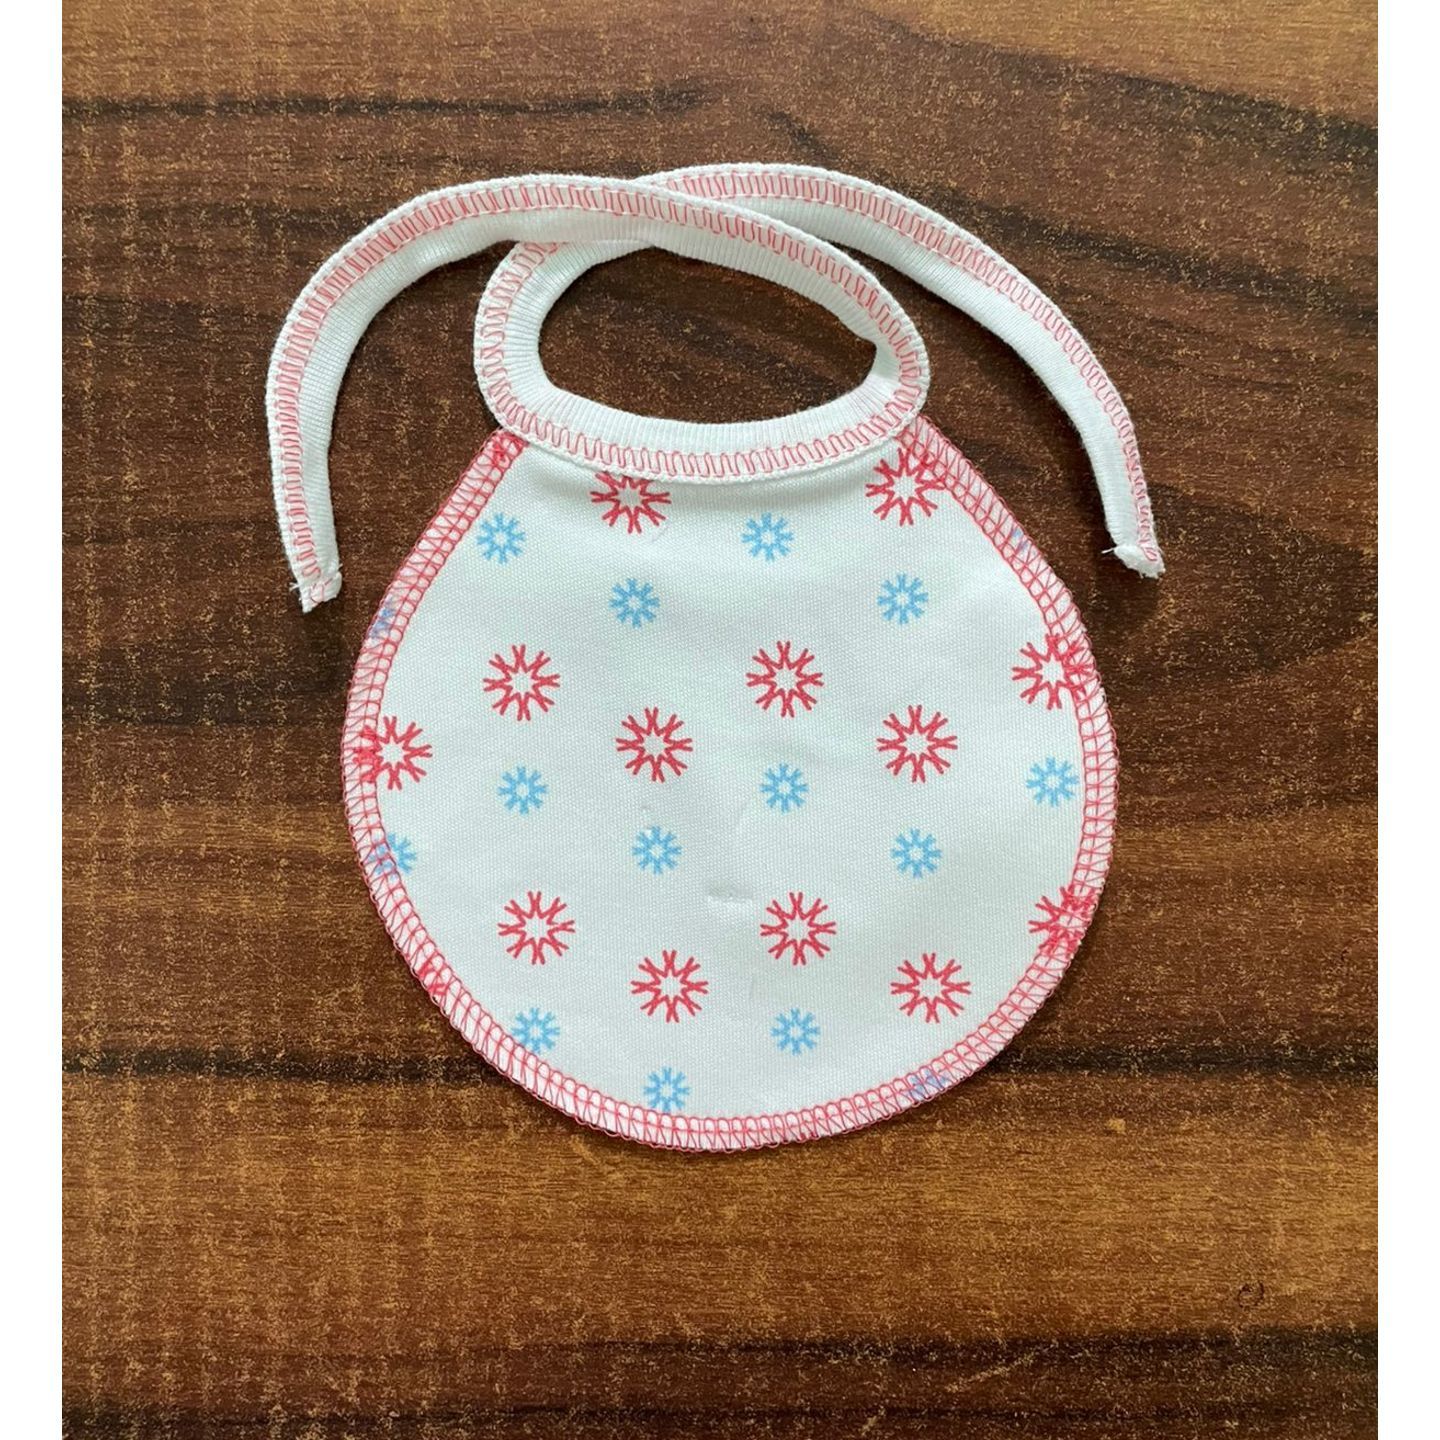 Cradle Togs Bib Rs 75 Only Made in India